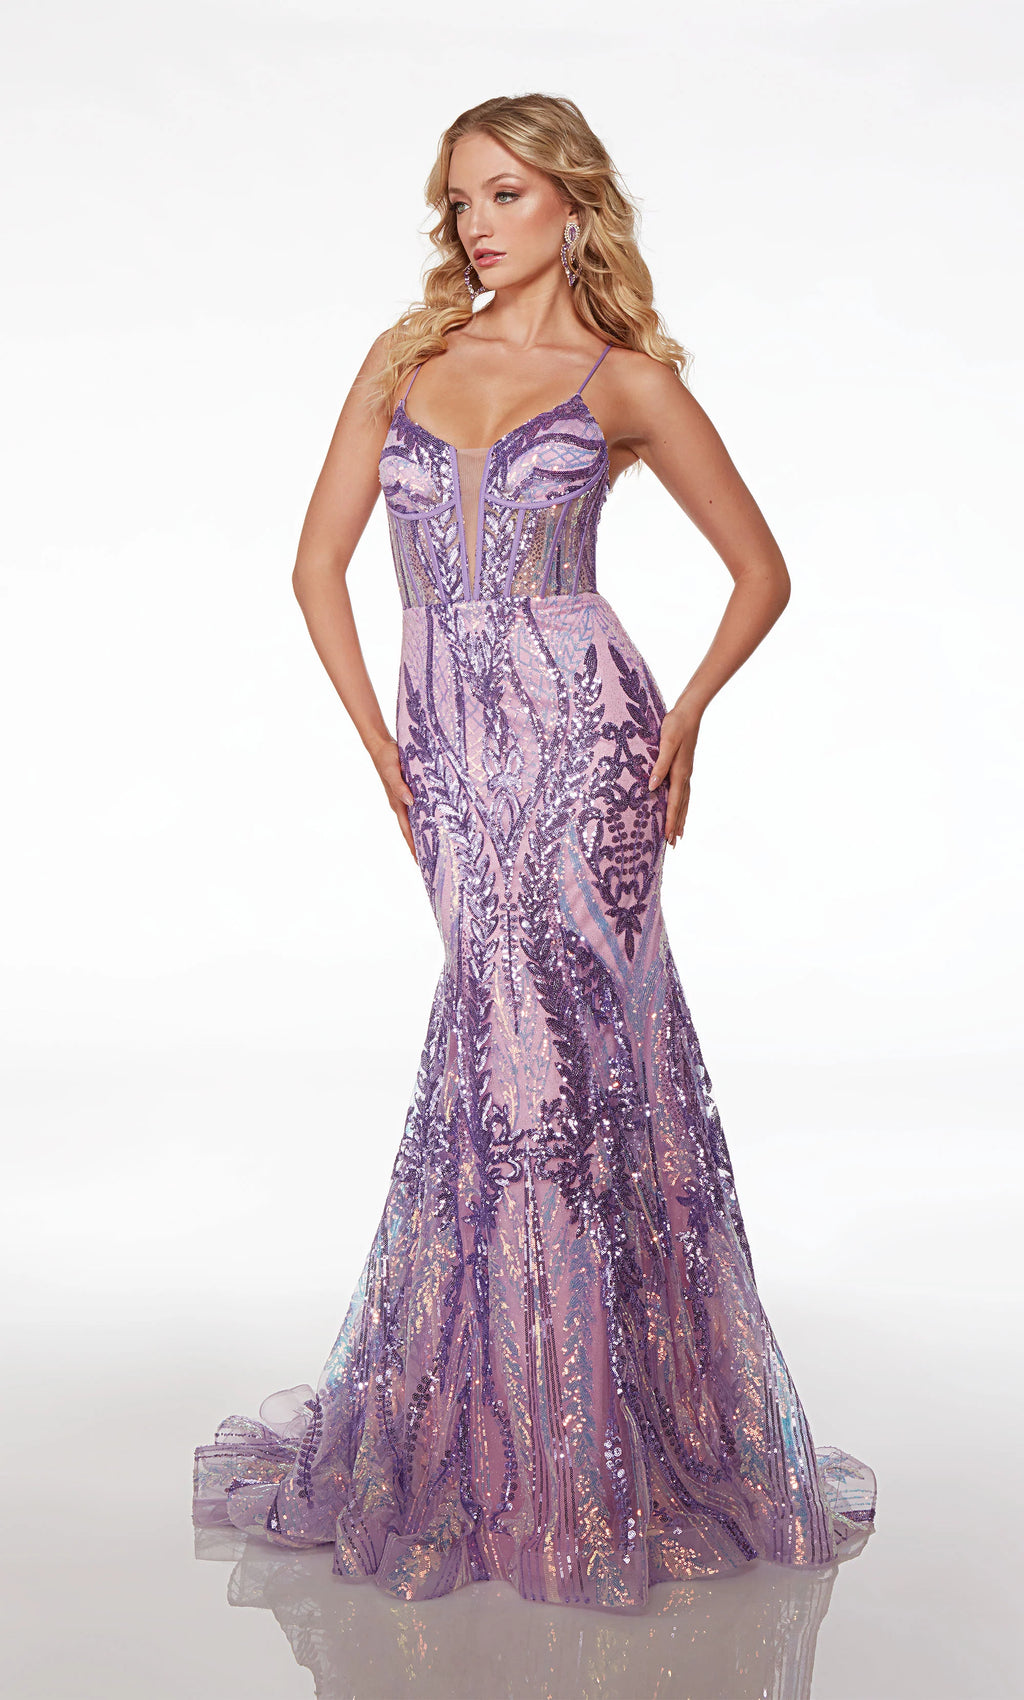 Make the stop and stare with the one of a kind mermaid long style 61656 by Alyce. Displaying a modest plunging neckline along the illusion corset bodice and complimented with adjustable straps. The fit and flare silhouette is gleaming with dazzling sequin that will have you sparkling perfectly from every angle all night long.